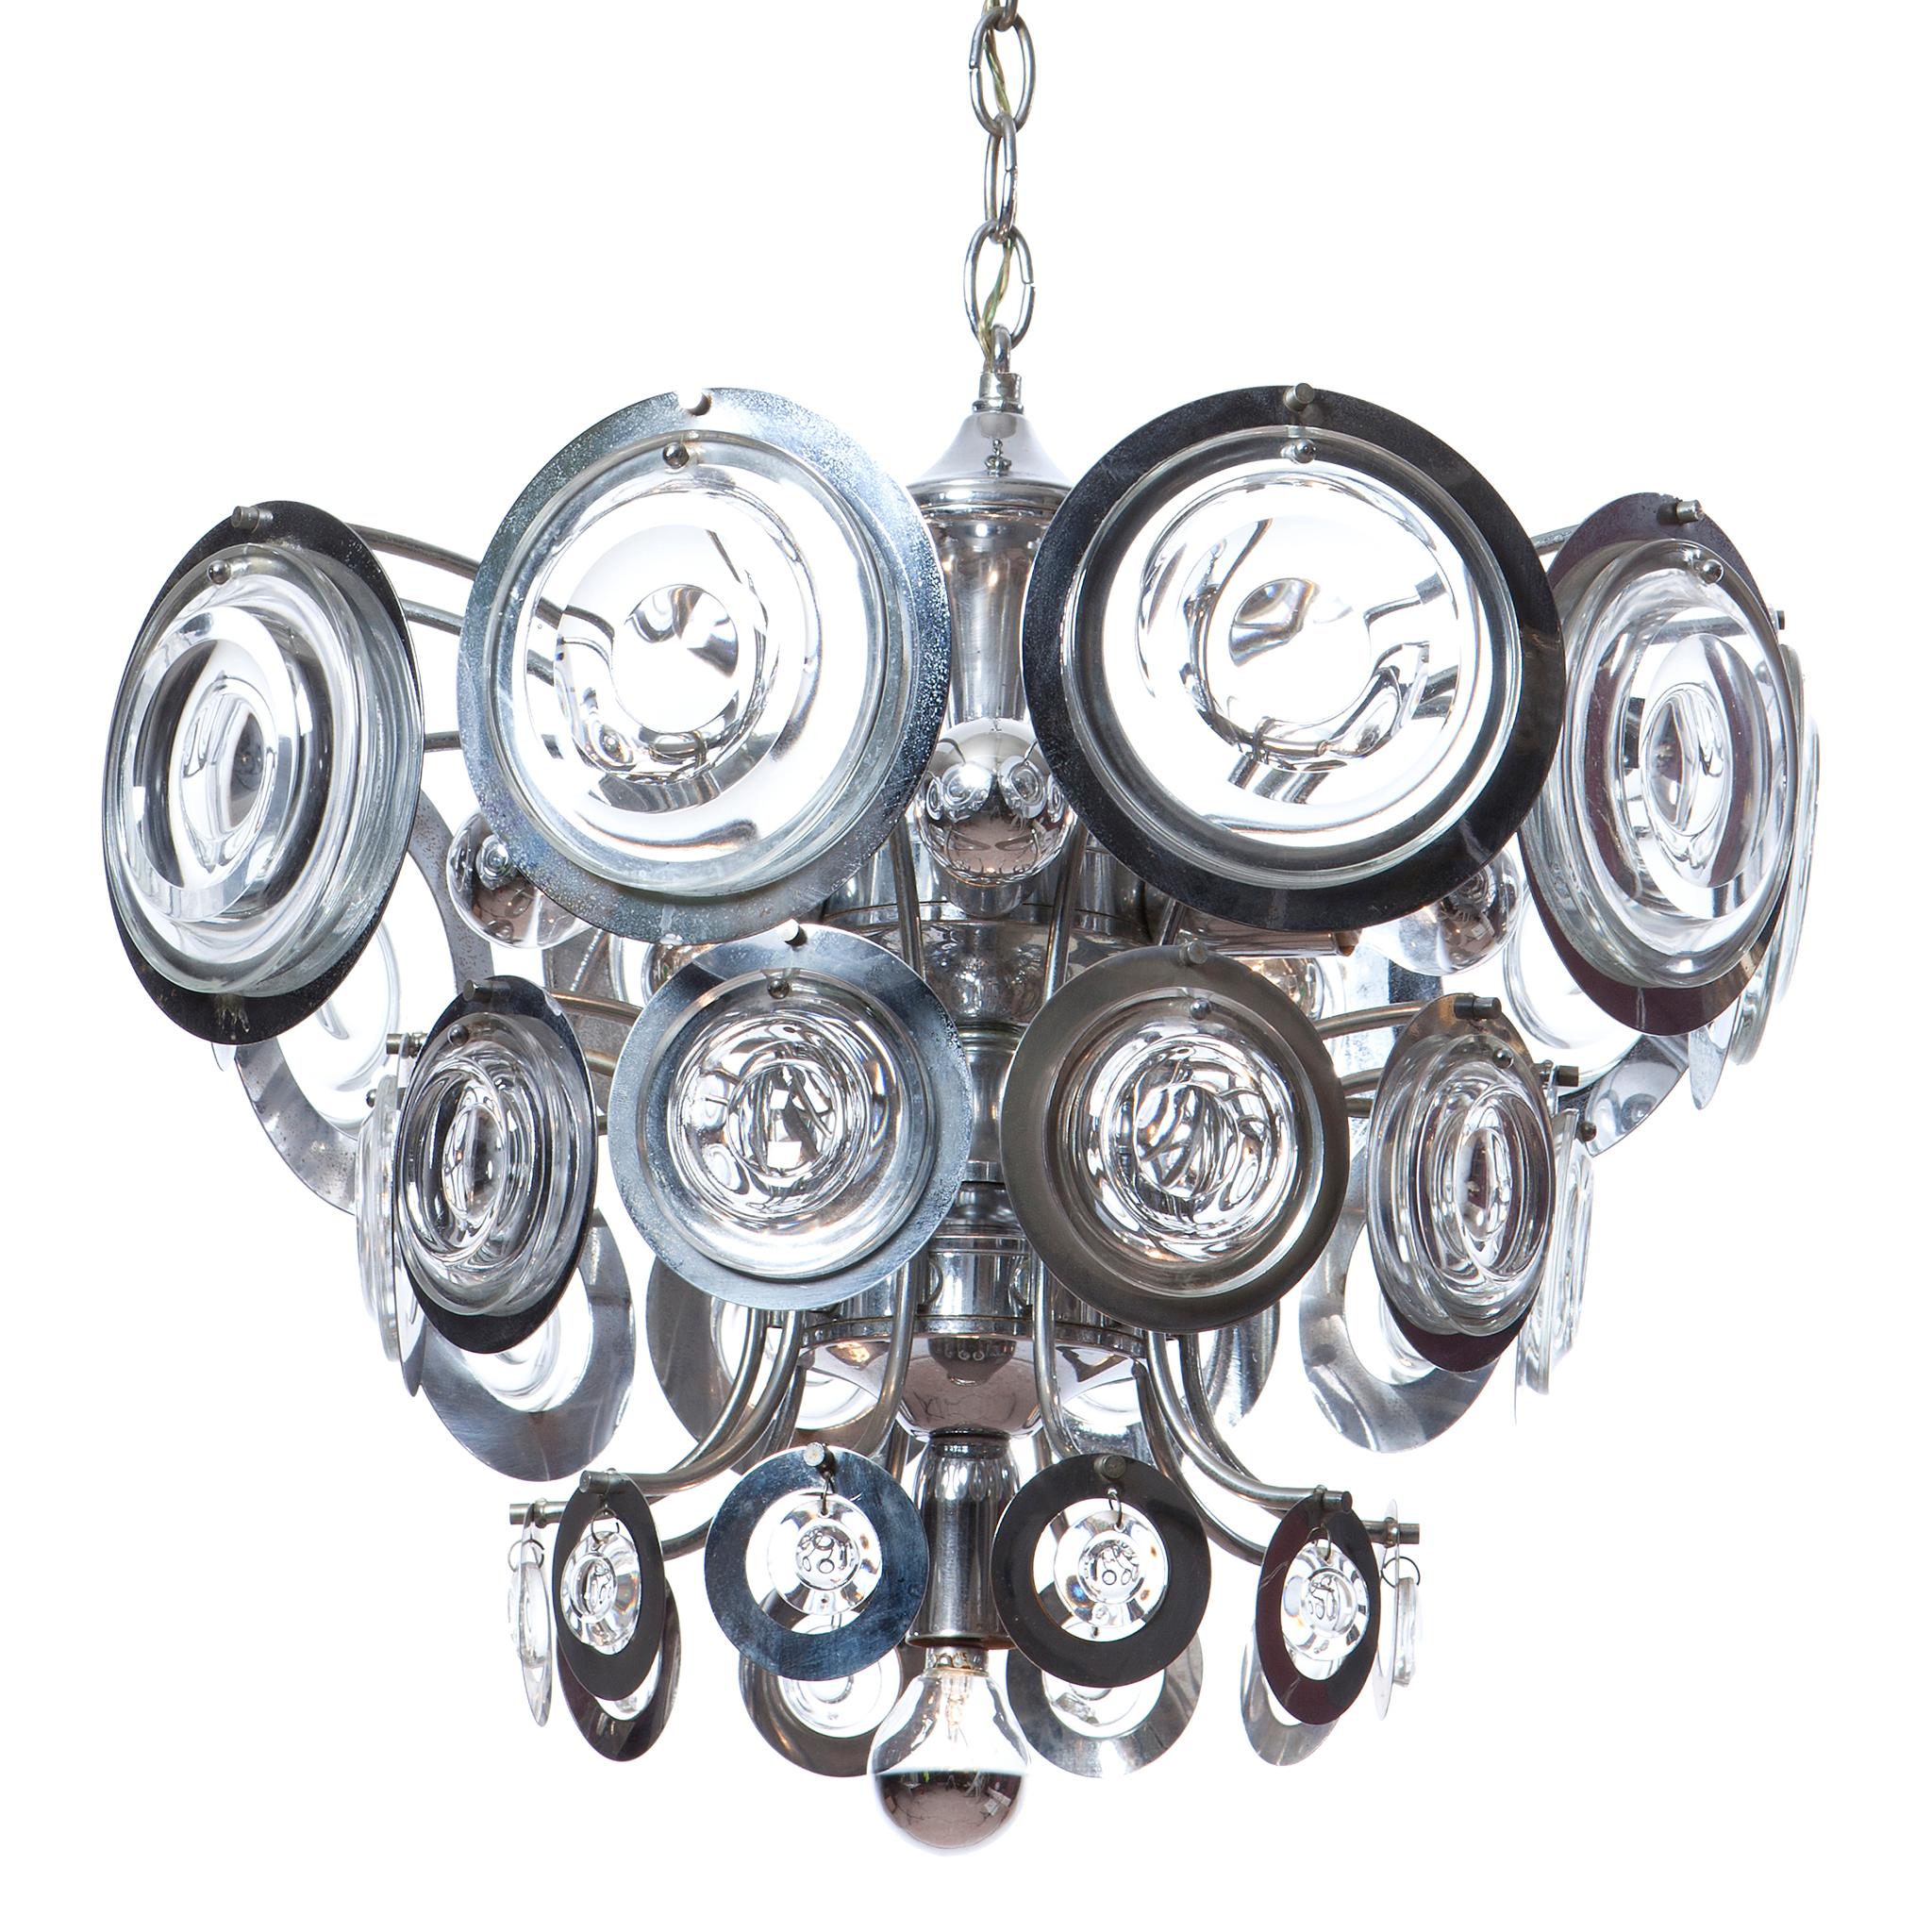 This striking chandelier has 3 levels of chrome rings and fitted glass, the reflection makes the light twinkle from every spot in the room. 6 lightbulb fitting.